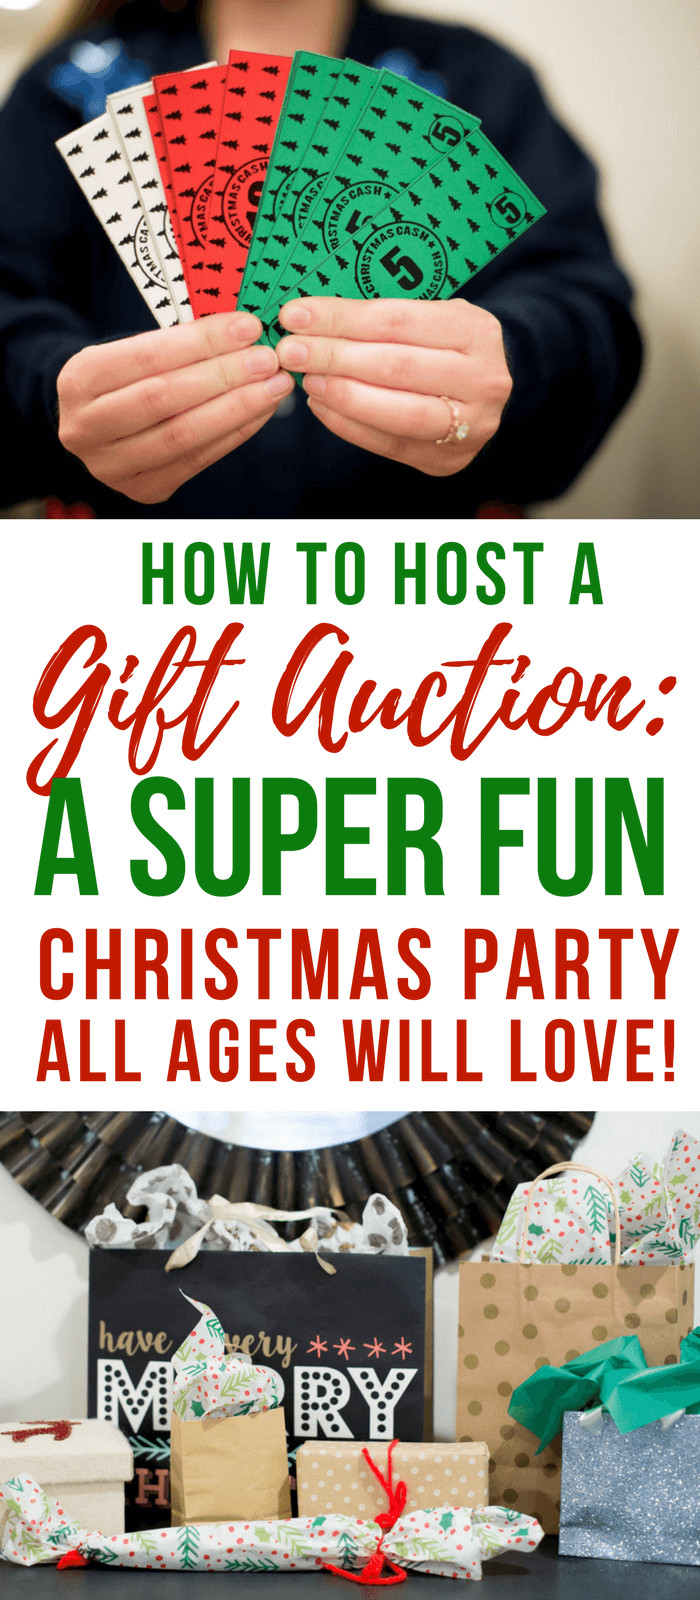 Holiday Party Gift Ideas
 Hilarious White Elephant Gift Auction Christmas Party